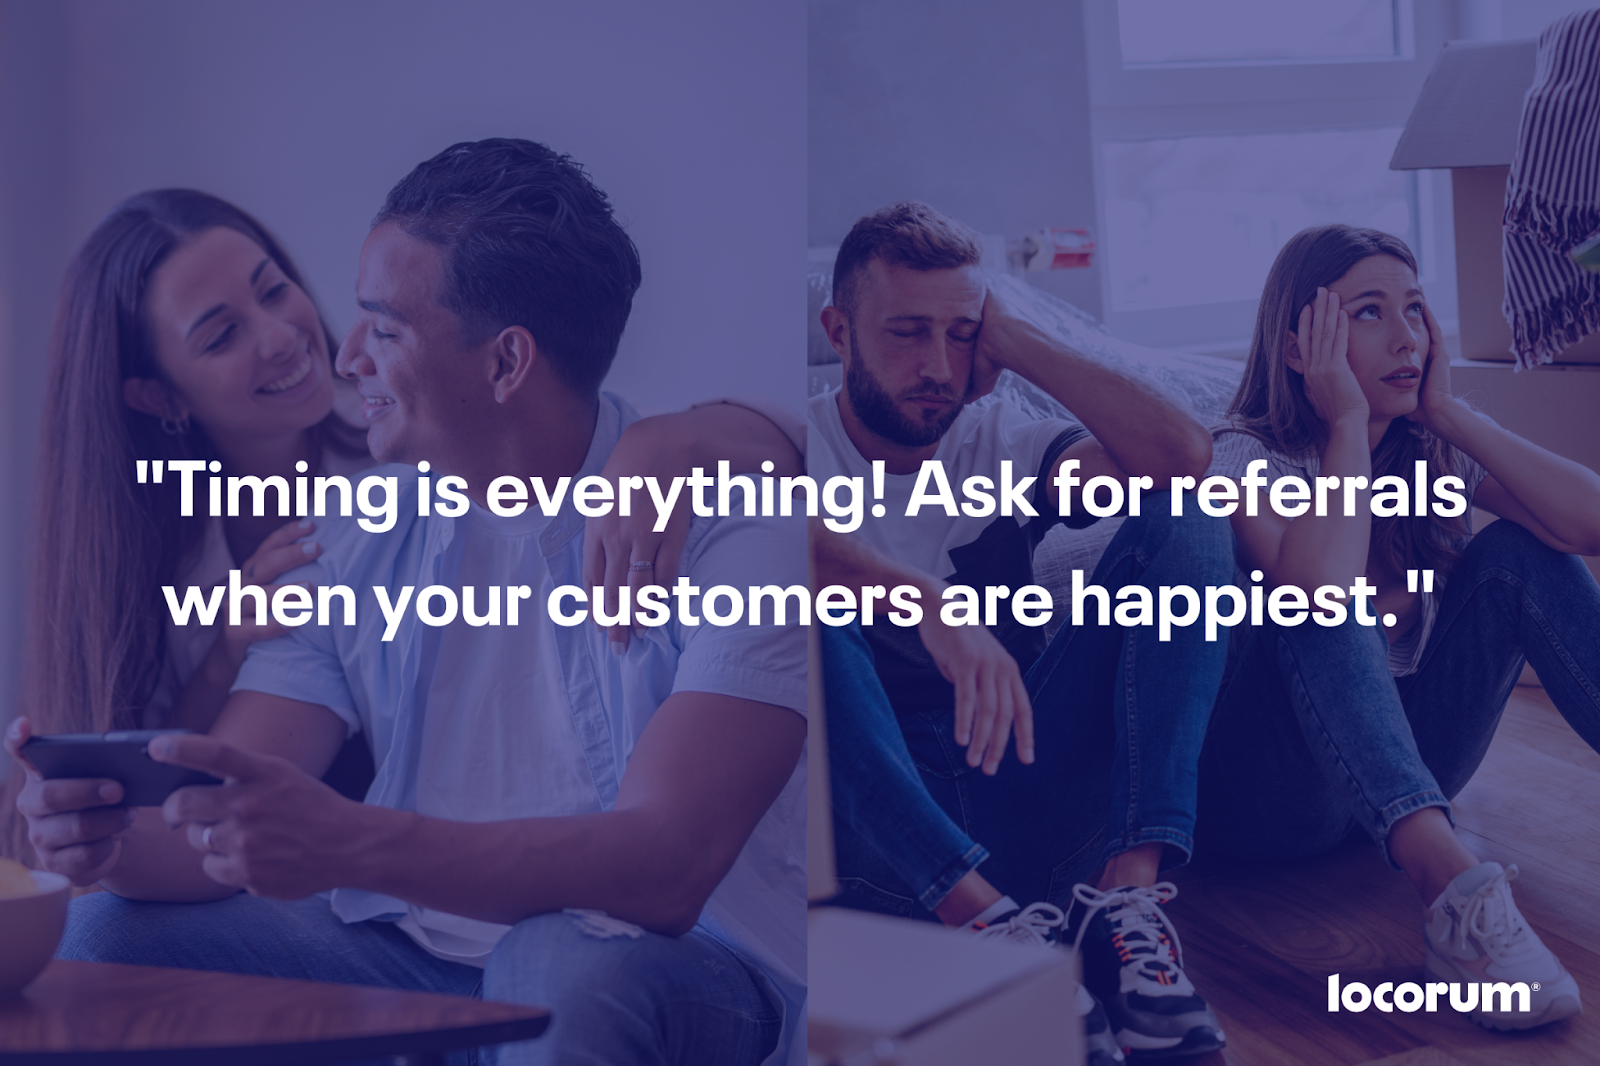 Timing is everything! Ask for referrals when your customers are happiest.